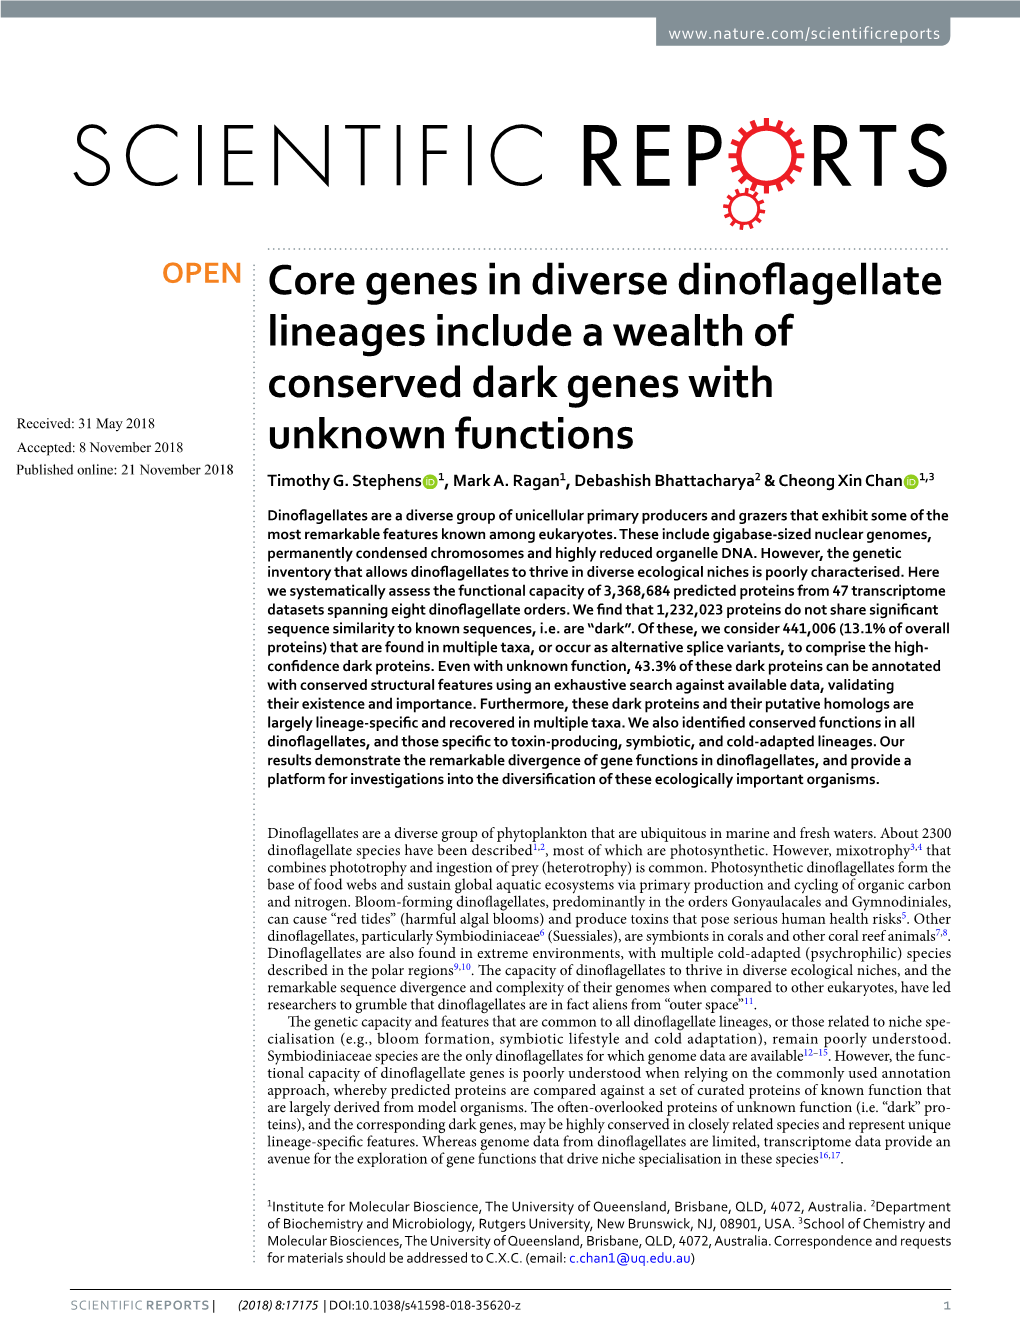 Core Genes in Diverse Dinoflagellate Lineages Include a Wealth Of